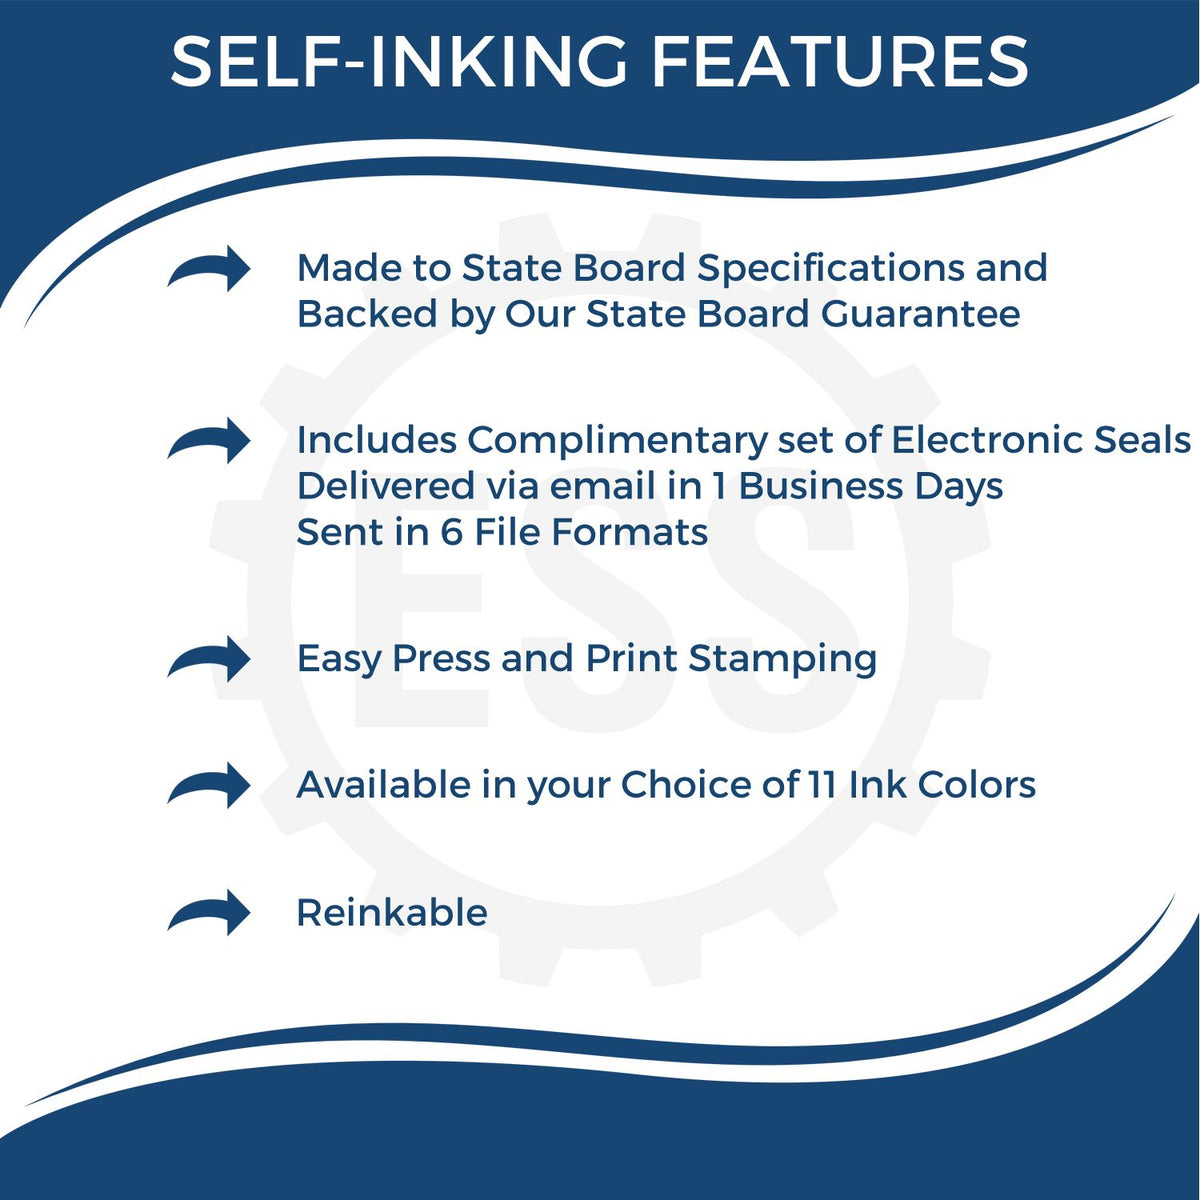 A picture of an infographic highlighting the selling points for the Self-Inking Rectangular South Dakota Notary Stamp